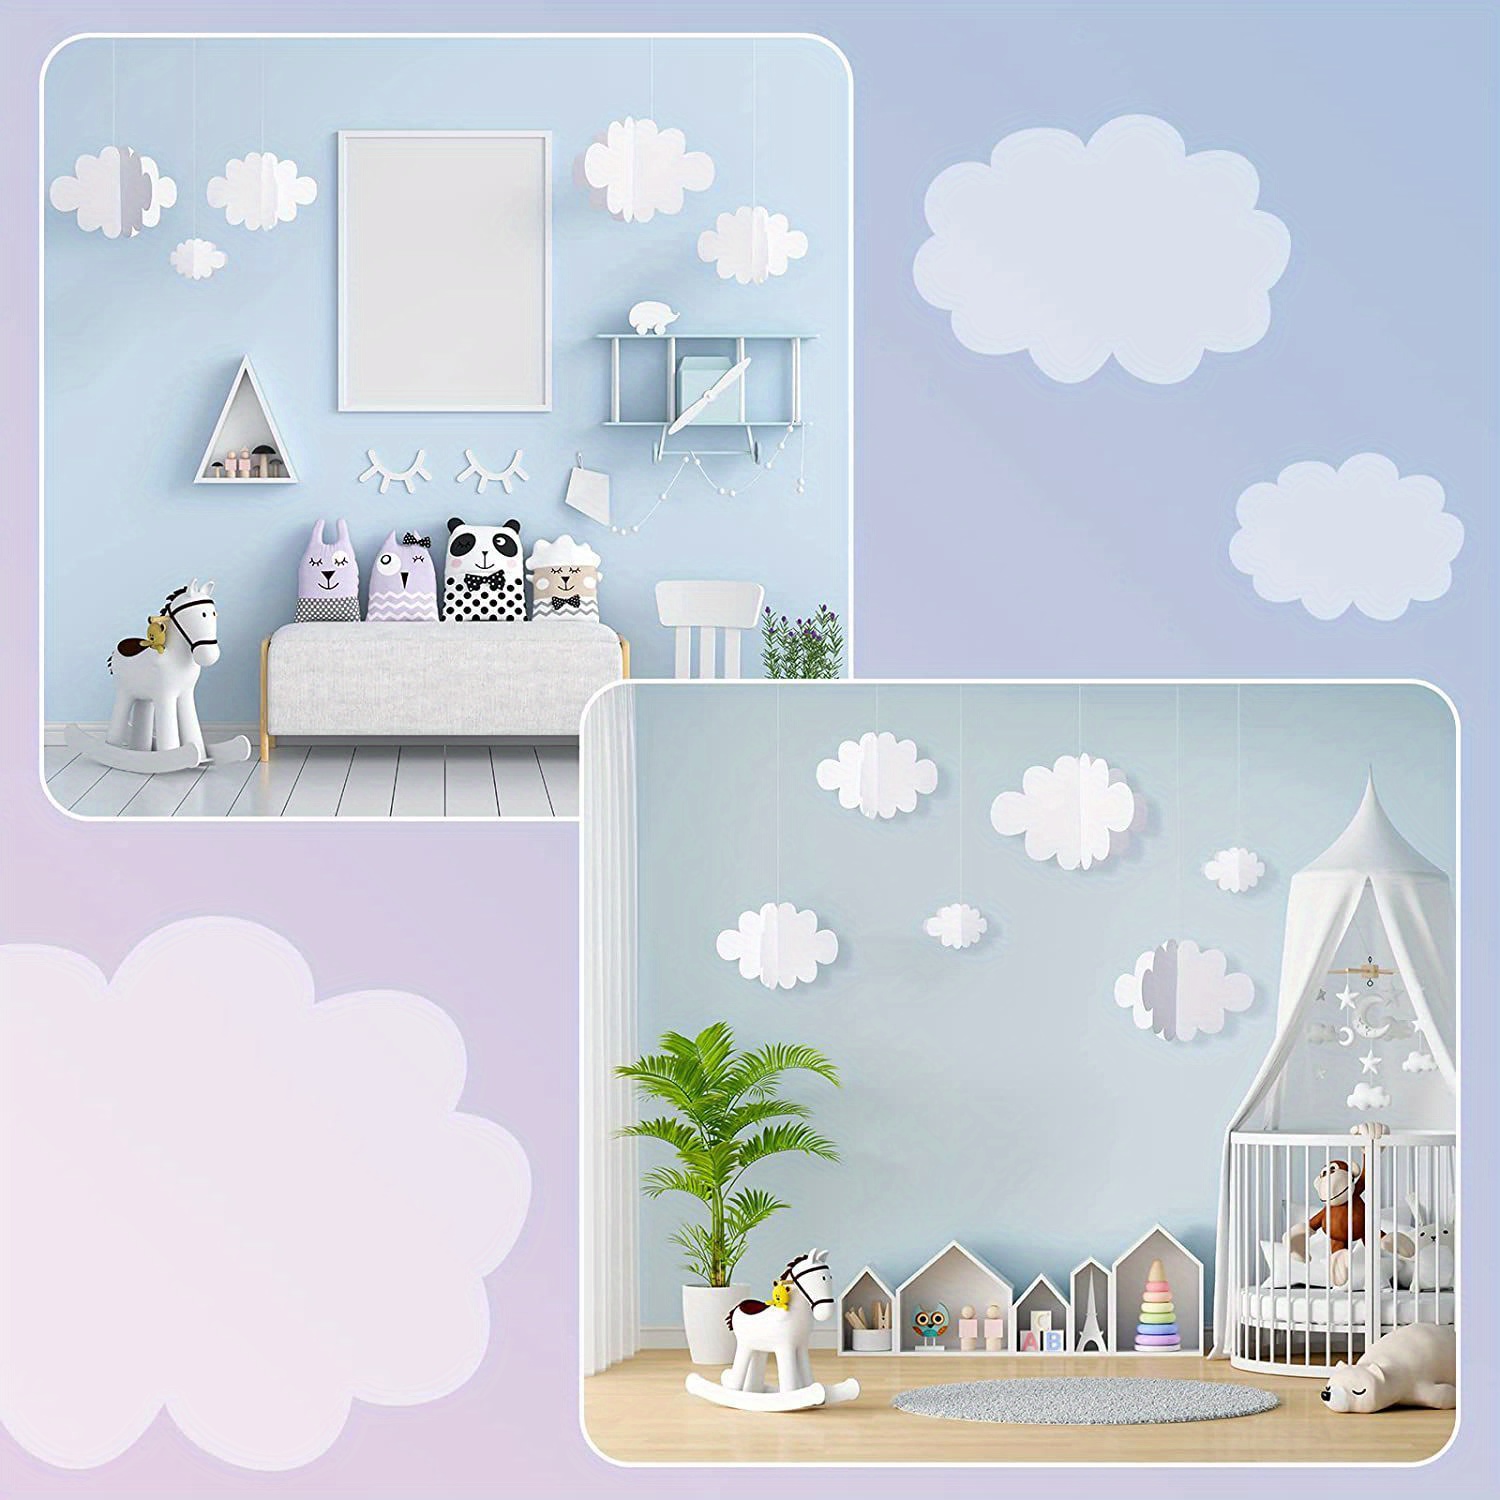 3D Cloud Decorations Hanging Clouds for Ceiling Artificial Clouds Props Fake  Cloud Ornaments Wall Decor Clouds Imitation Decors - AliExpress